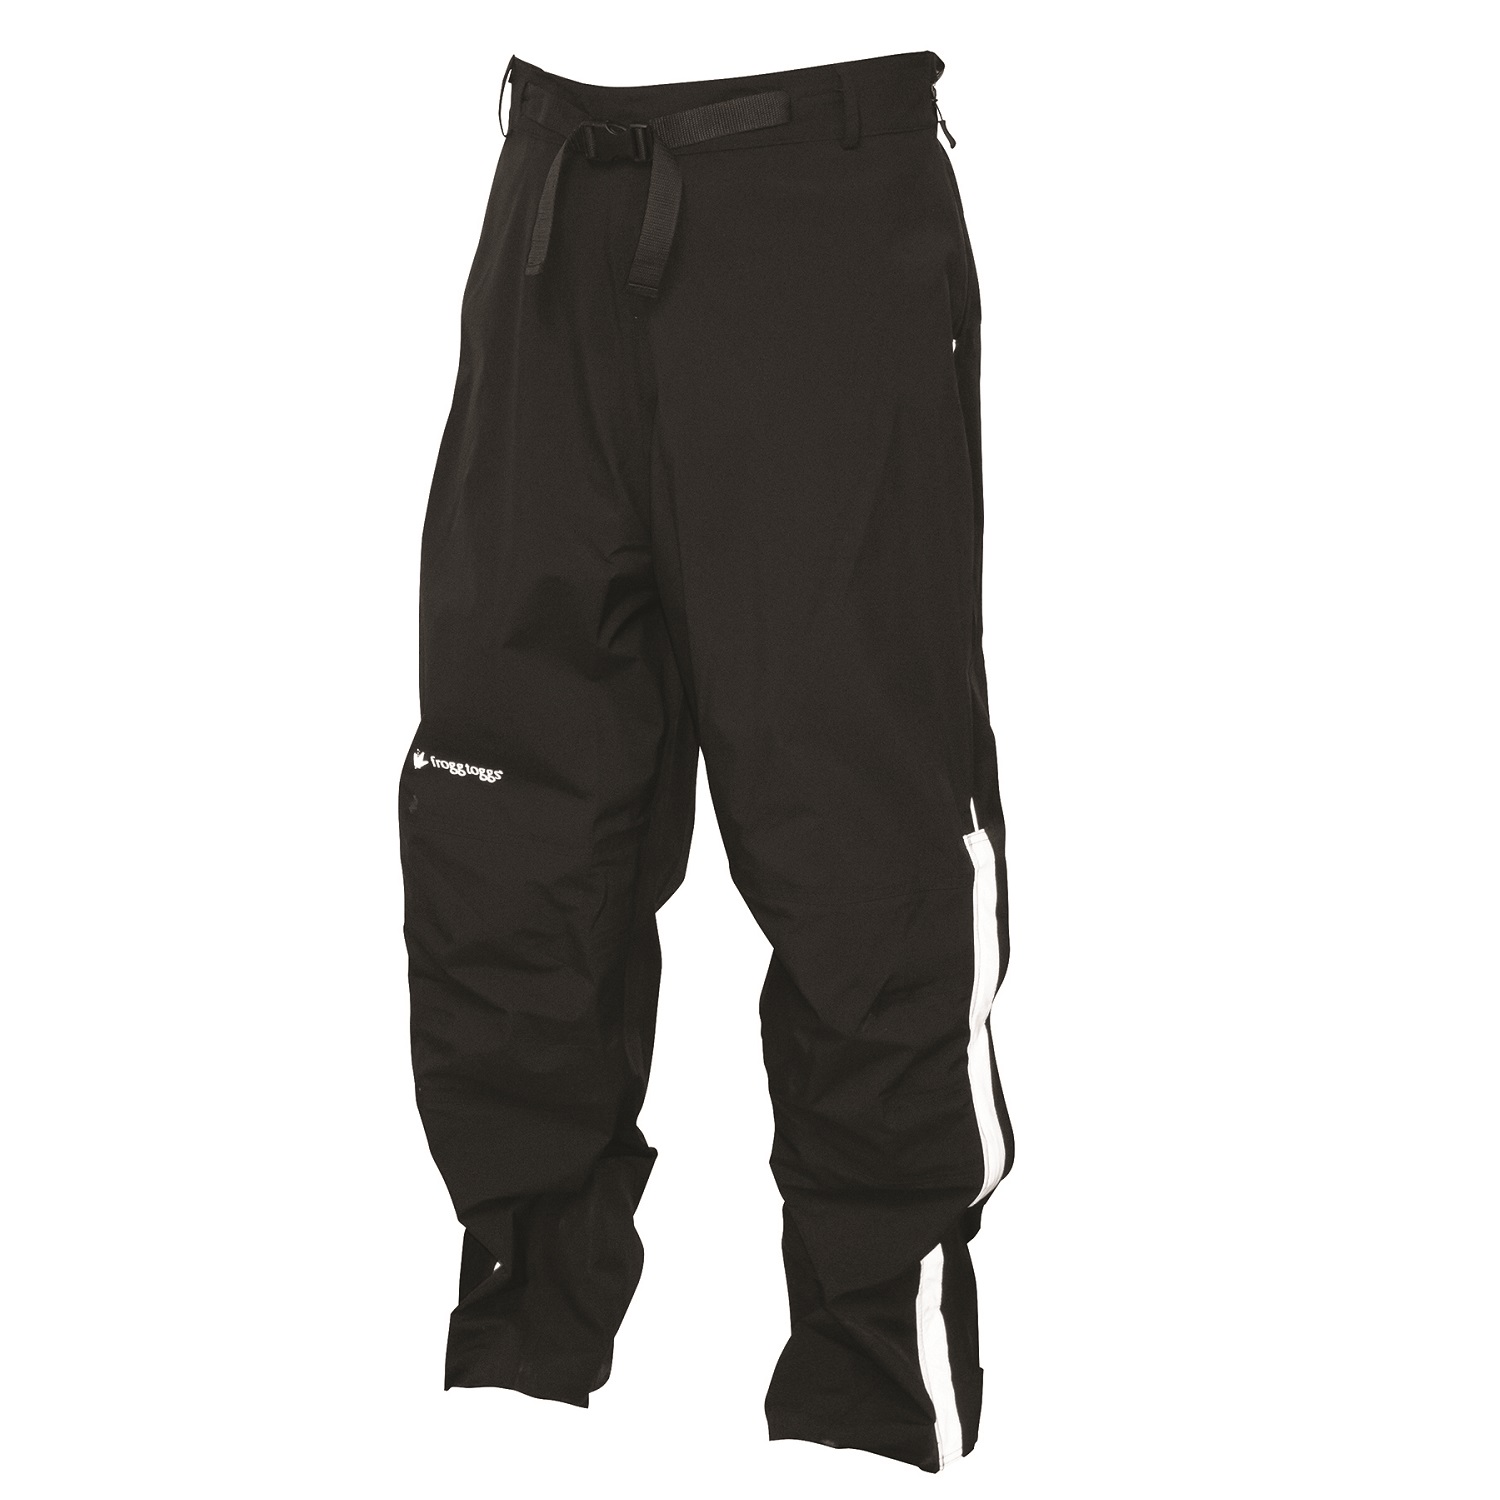 Frogg Toggs Pilot Frogg Road Pant Black With Reflective - Xx - Pfc85105-01xx